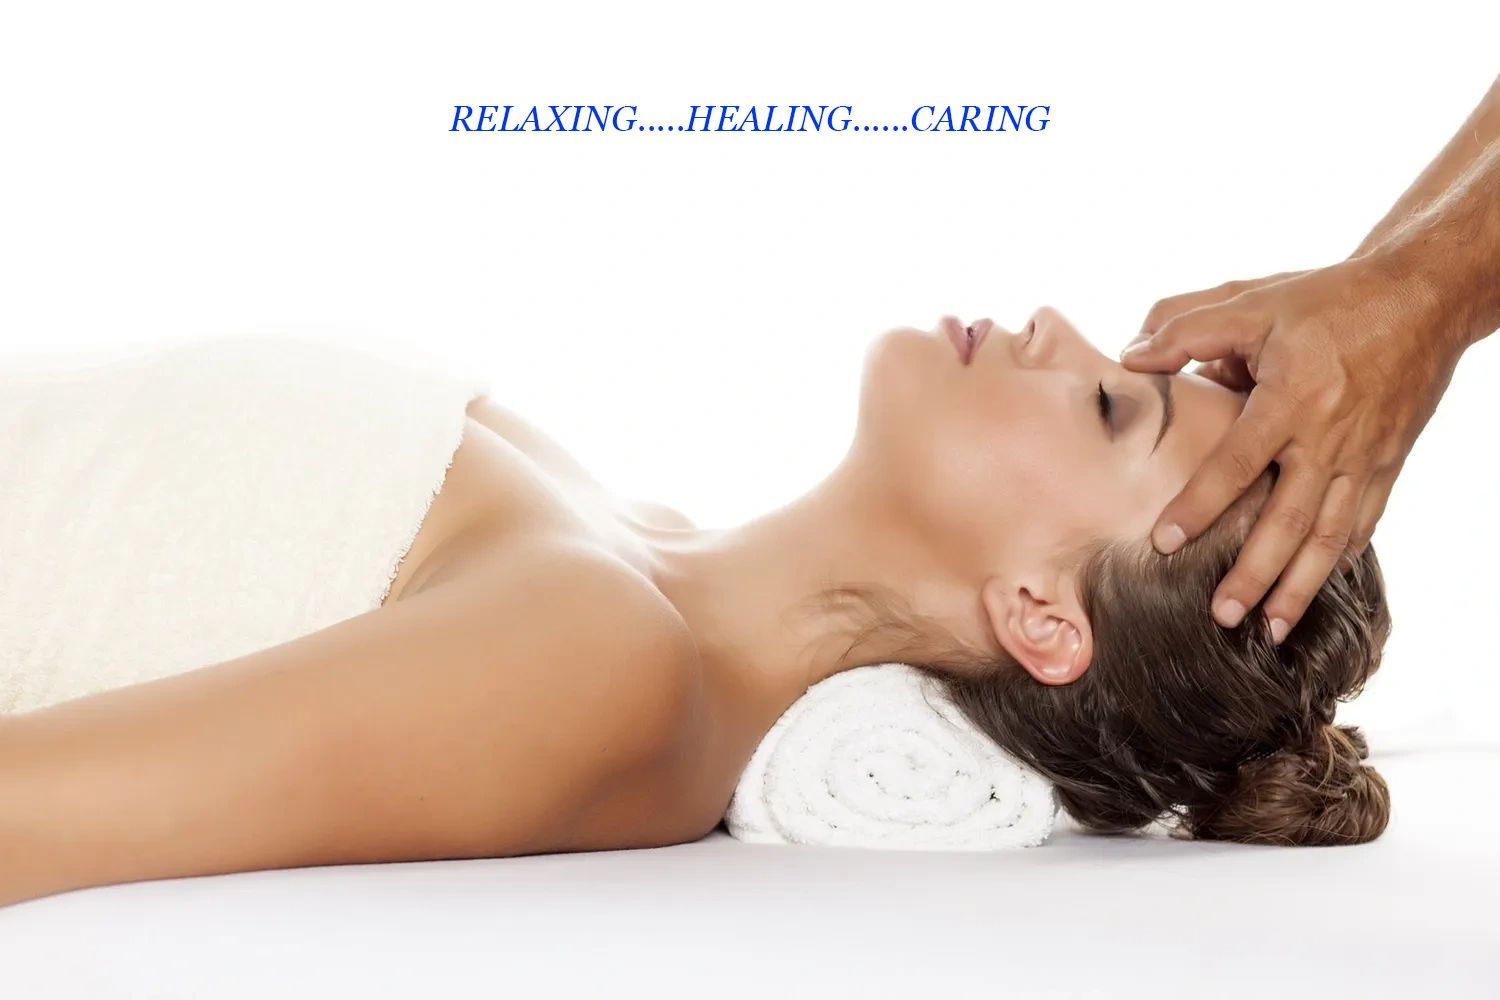 A Caring Touch​ Therapeutic Massage - Massage, Headache, Relief